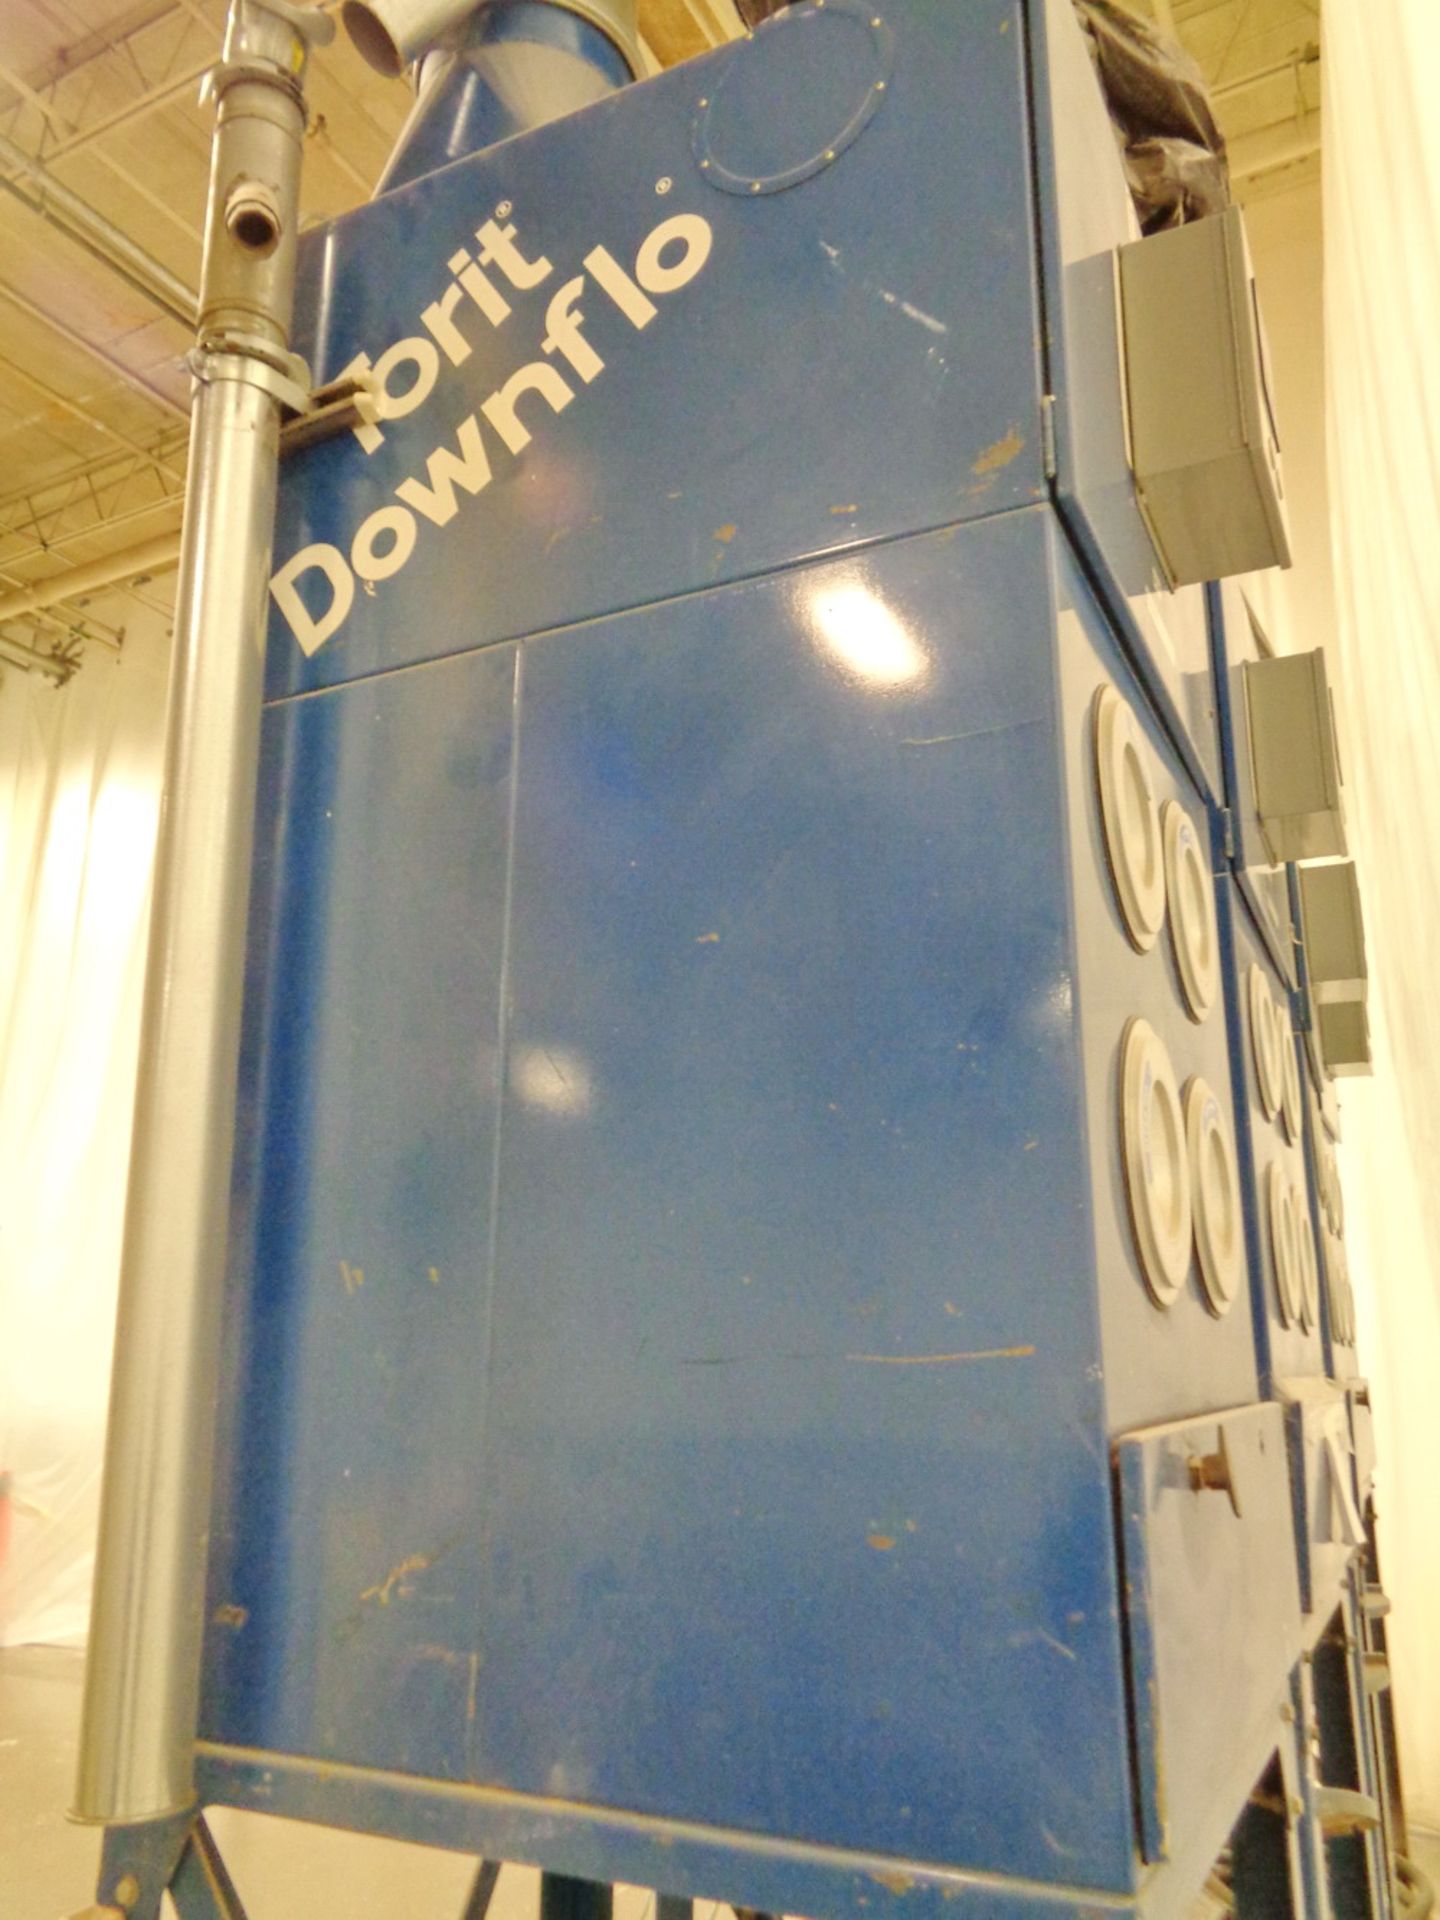 Torit Downflo Cartridge Dust Collector, Model SDF-4. - Image 3 of 11